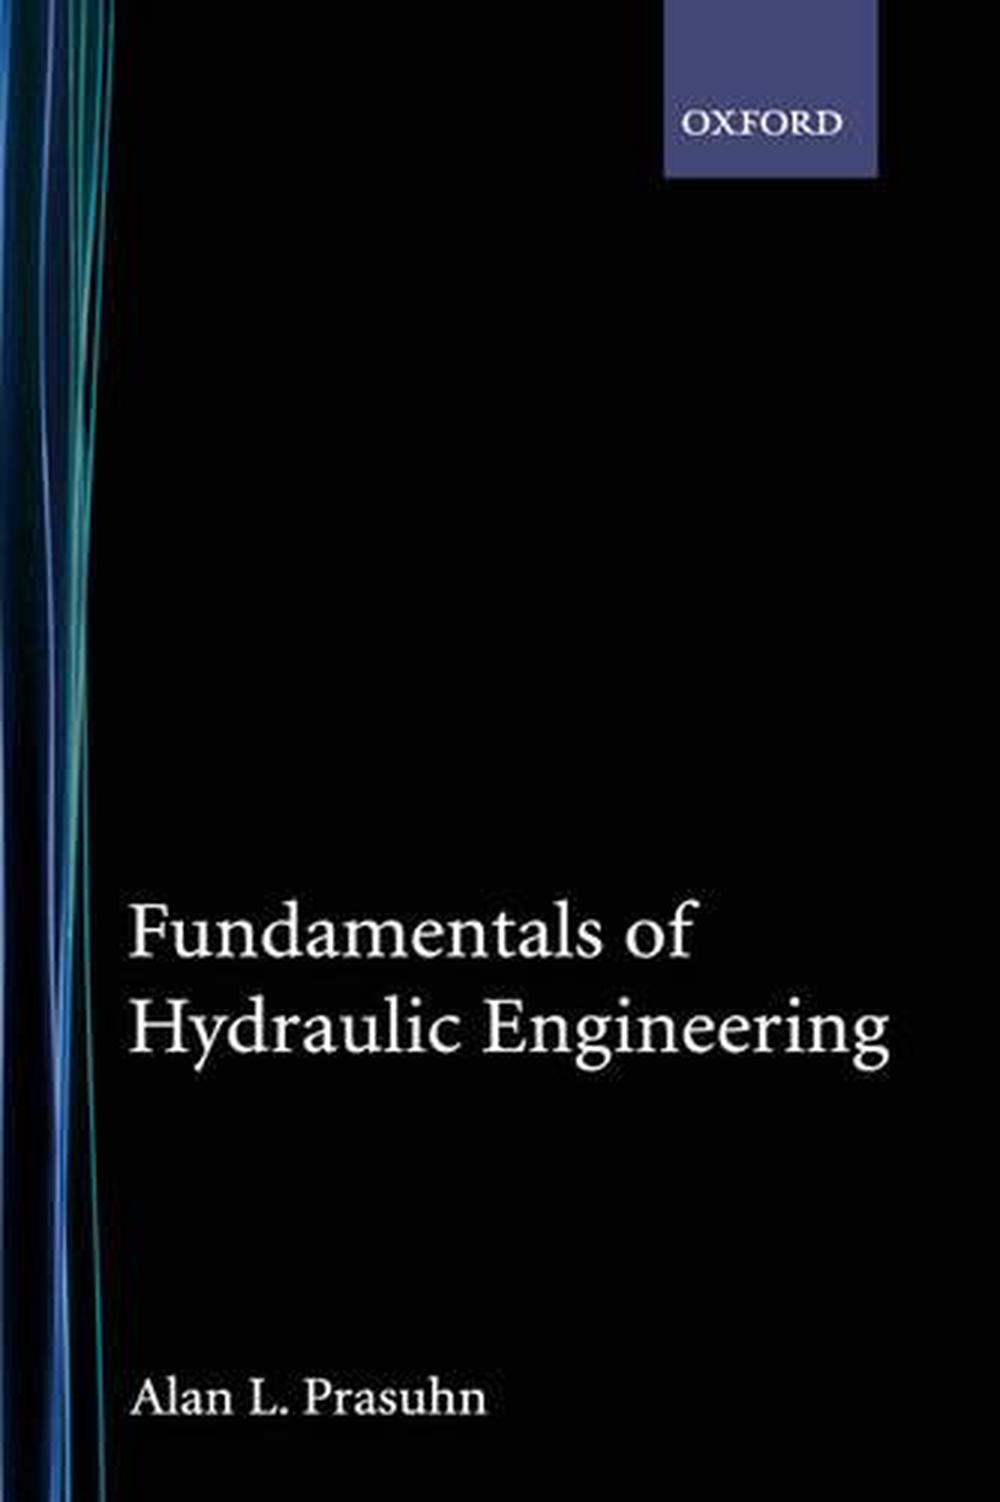 hydraulic engineering thesis